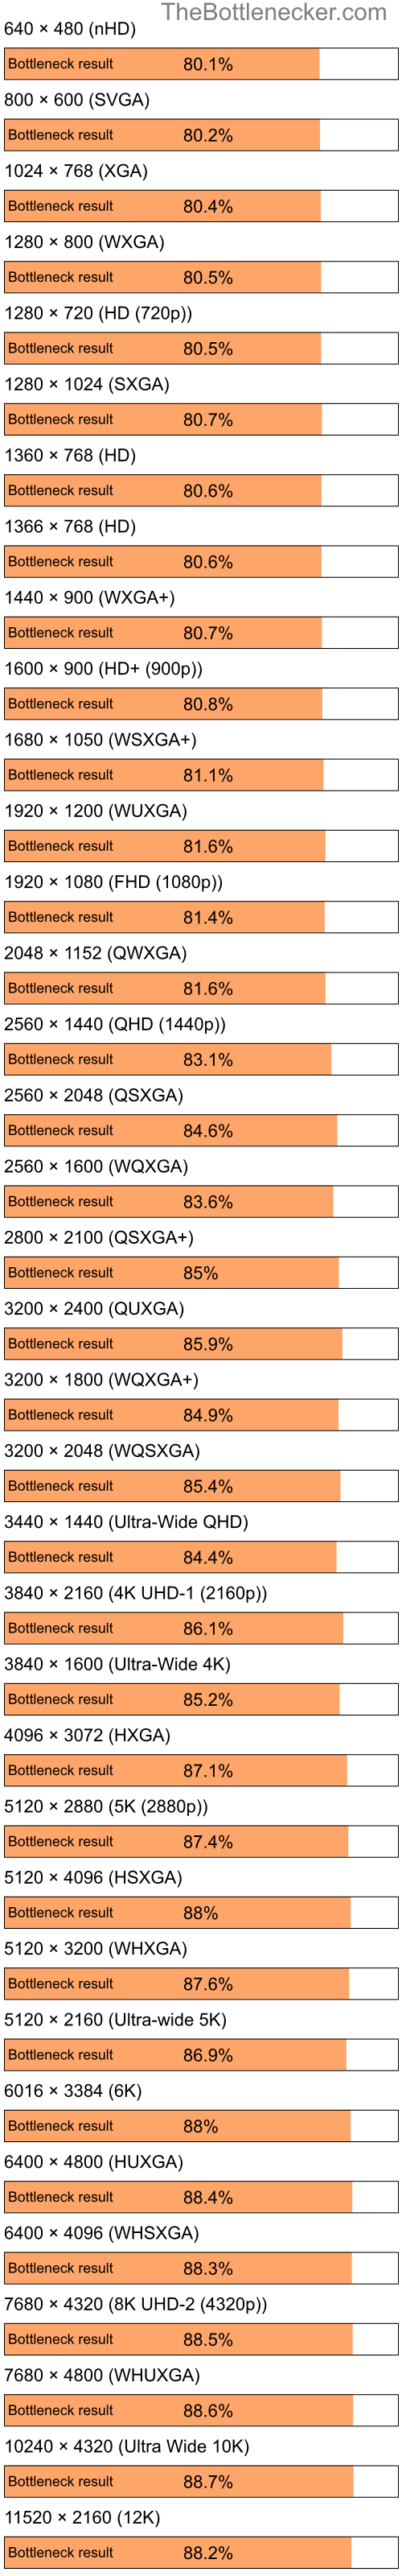 Bottleneck results by resolution for Intel Celeron and NVIDIA GeForce 7025 in Graphic Card Intense Tasks